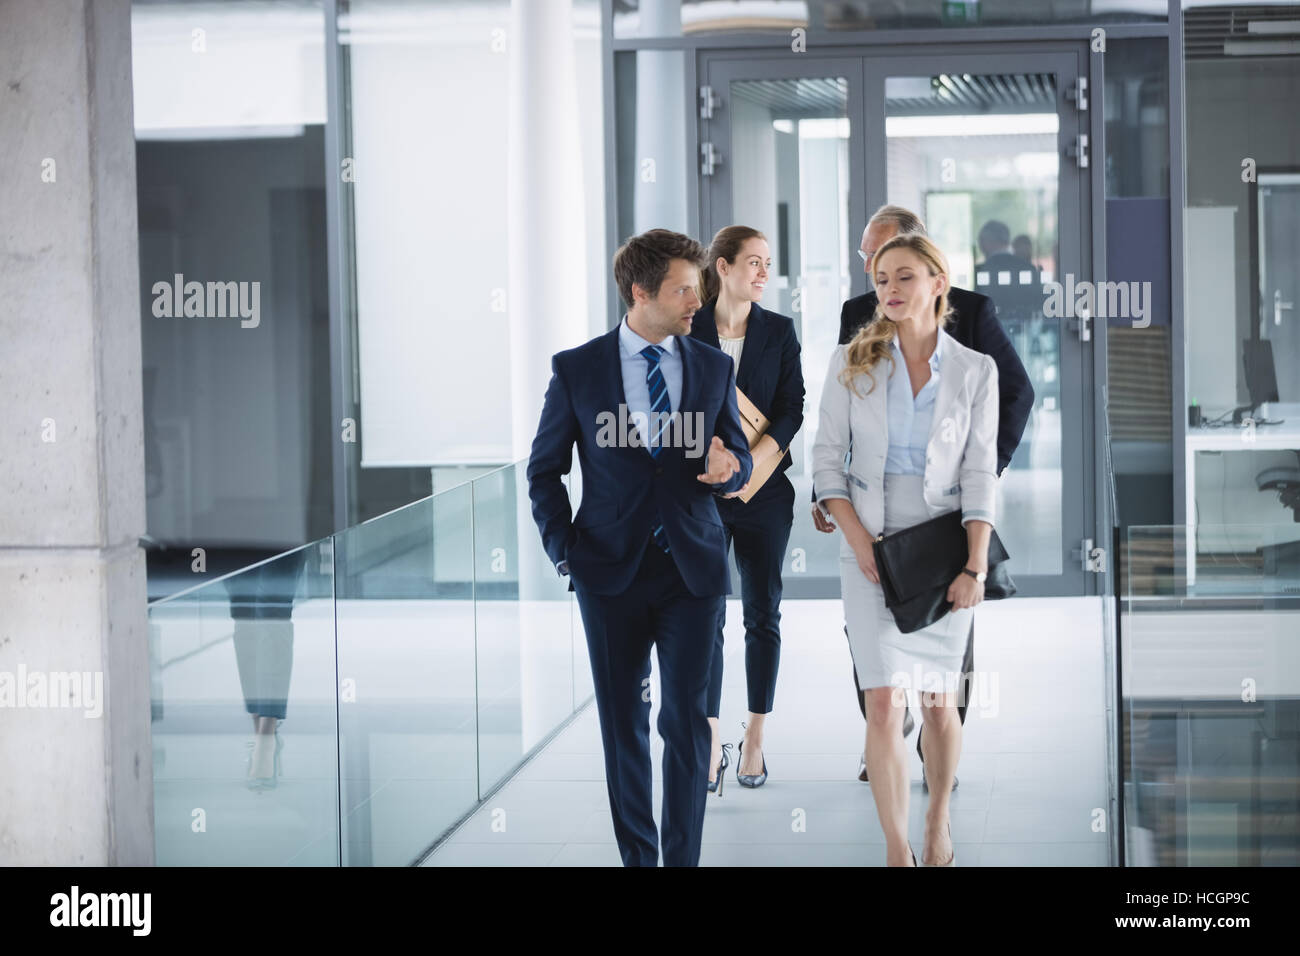 Businessman walking with colleagues Stock Photo